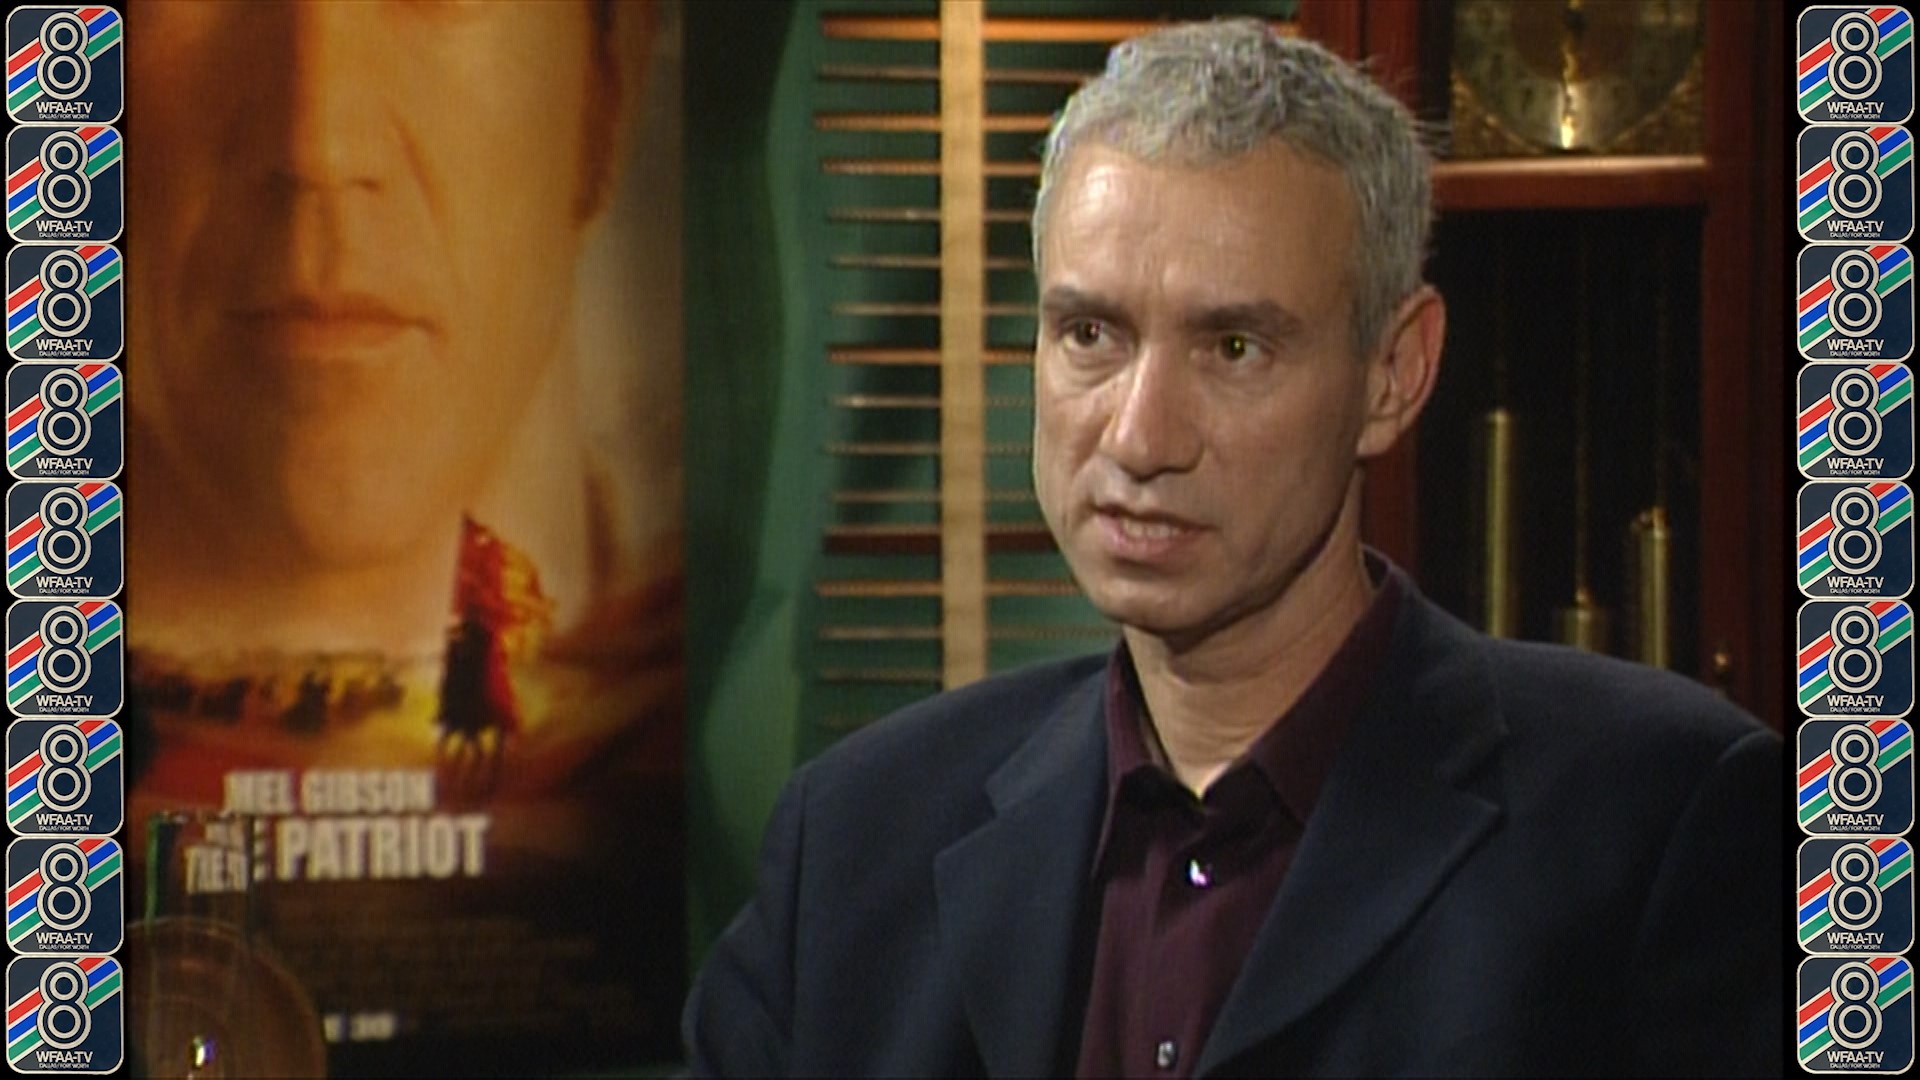 Roland Emmerich sat down with WFAA to talk about making the 2000 film The Patriot.